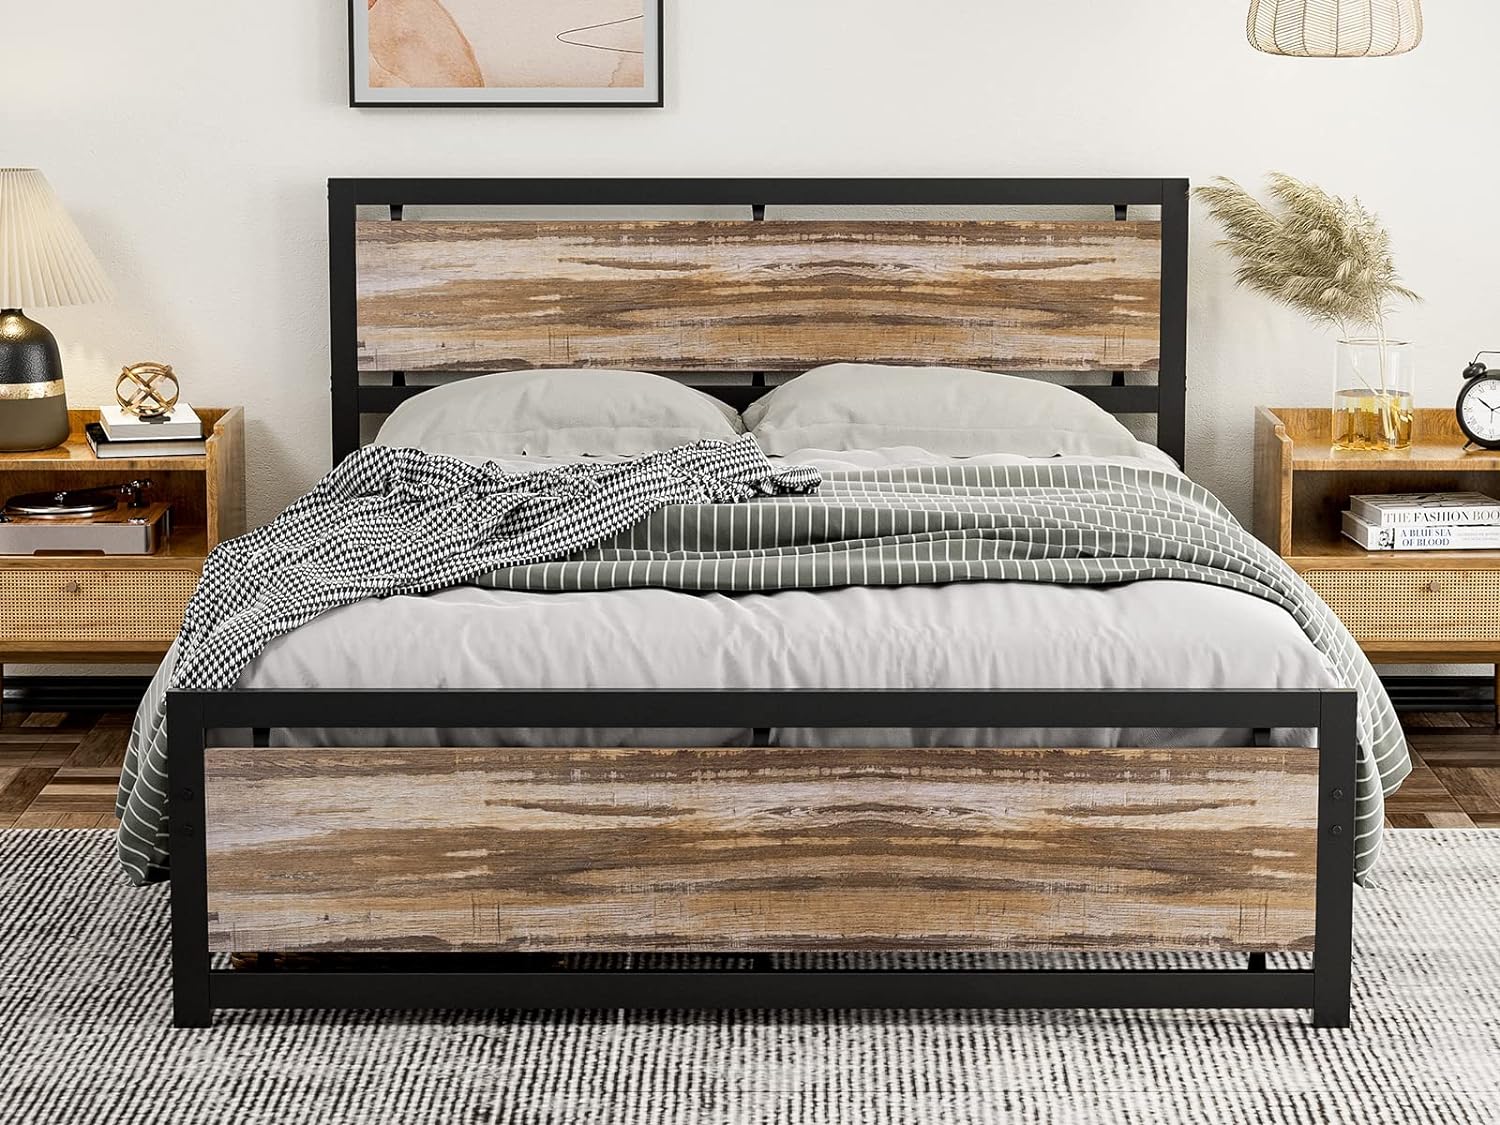 IKIFLY Metal Queen Size Bed Frame with Wooden Headboard Footboard - Industrial Metal and Wood Platform Bed - No Box Spring Needed - Strong Steel Slats Support - Queen, Light Brown